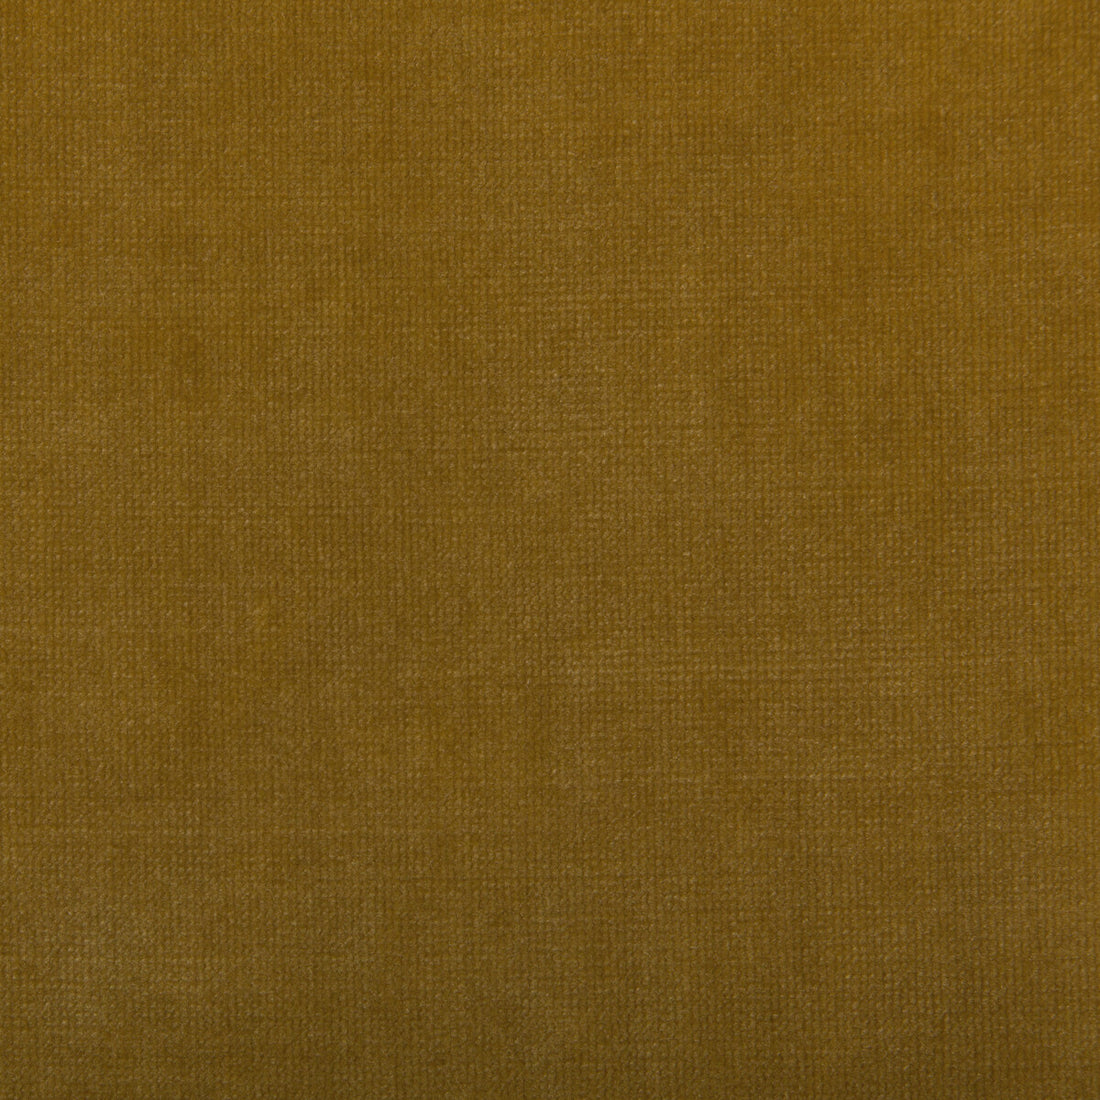 Chessford fabric in gold color - pattern 35360.4.0 - by Kravet Smart in the Performance collection